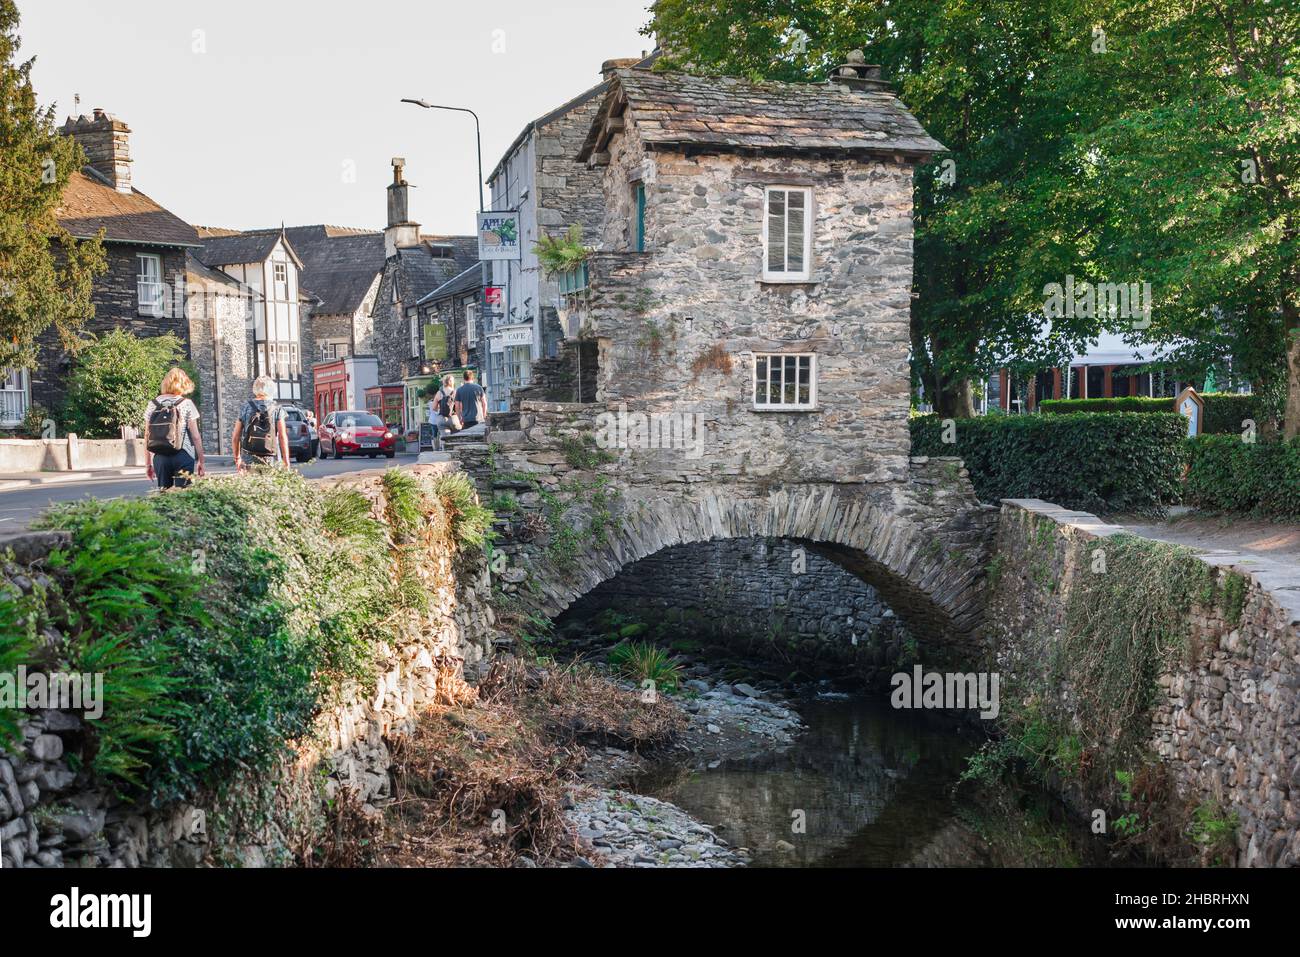 Ambleside Bridge House, view in summer of Bridge House, an historic bridge/summerhouse spanning Stock Ghyll, the town's small river, Cumbria, England Stock Photo